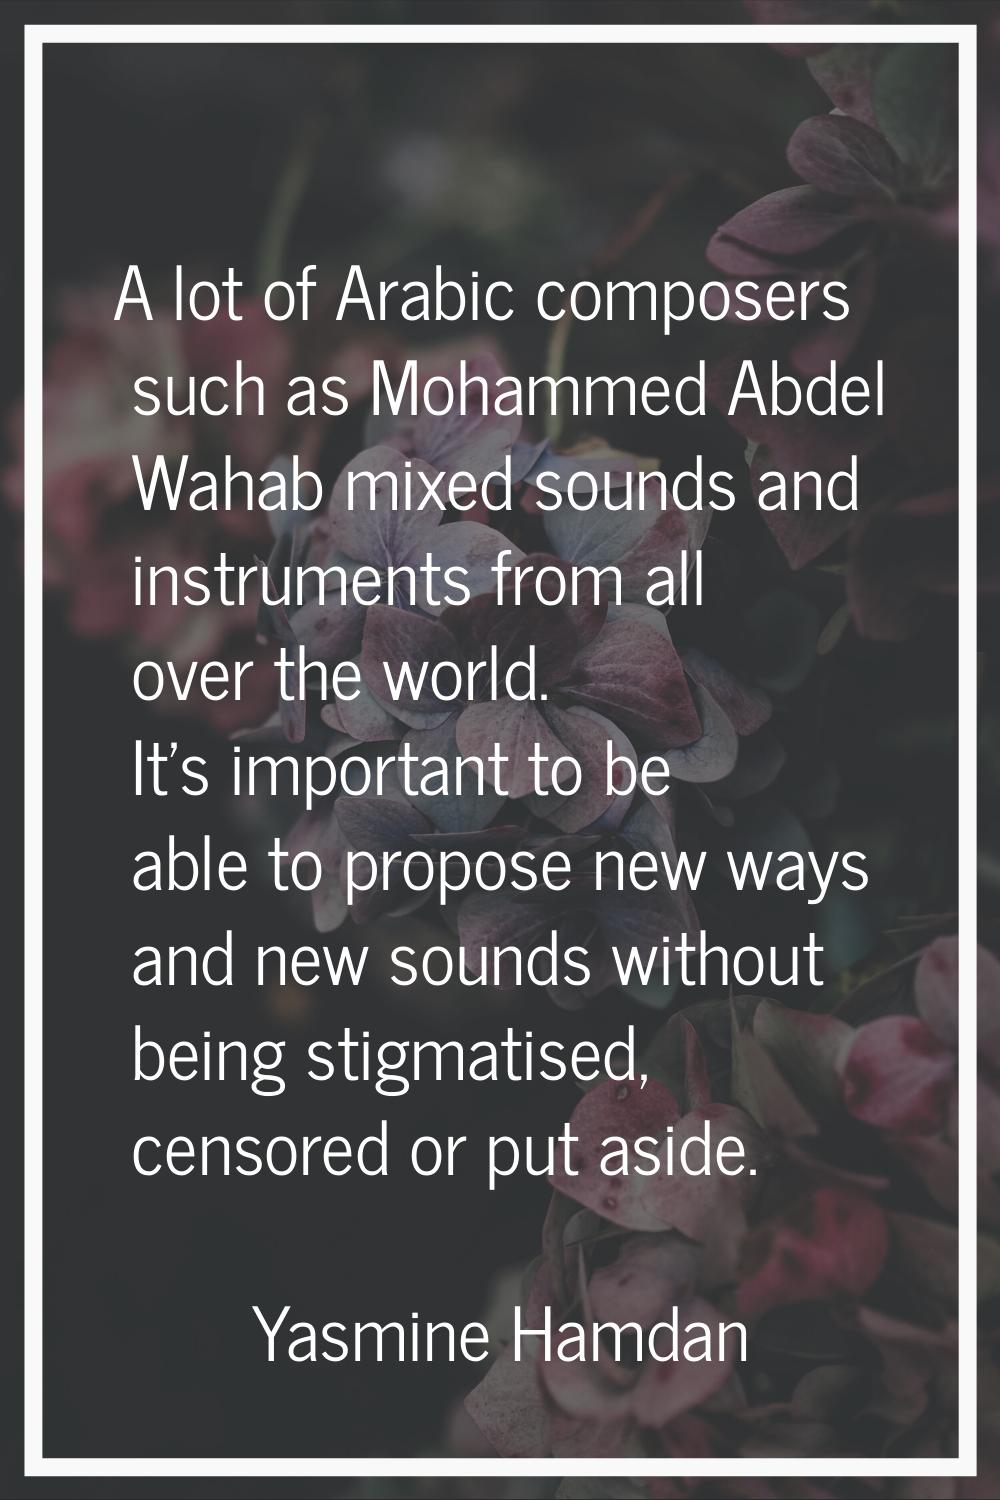 A lot of Arabic composers such as Mohammed Abdel Wahab mixed sounds and instruments from all over t